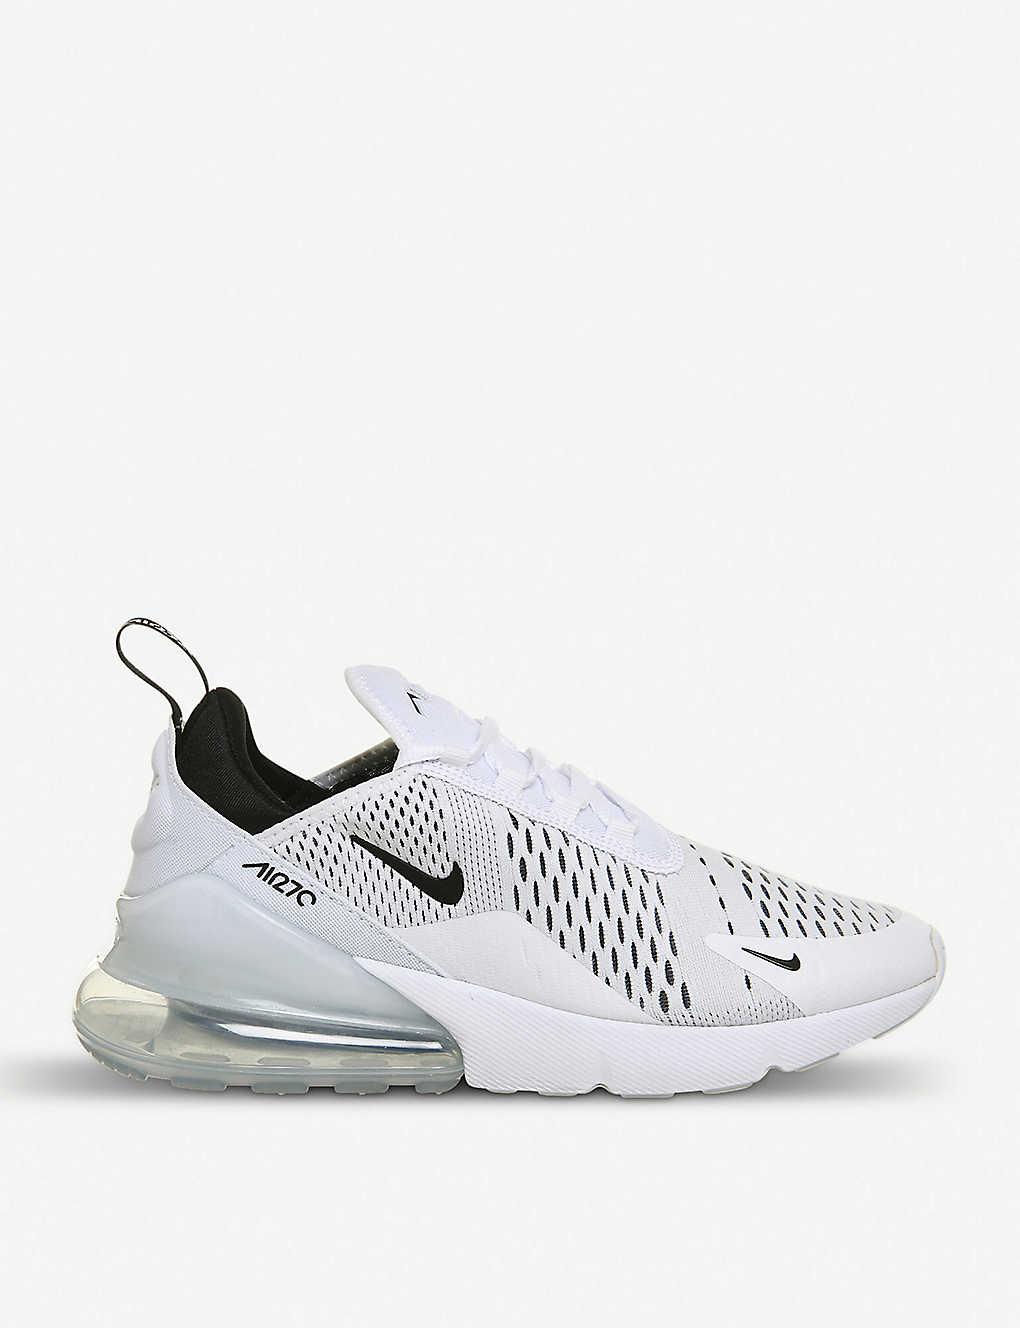 Nike Air Max 270 Low-top Mesh Trainers in White | Lyst